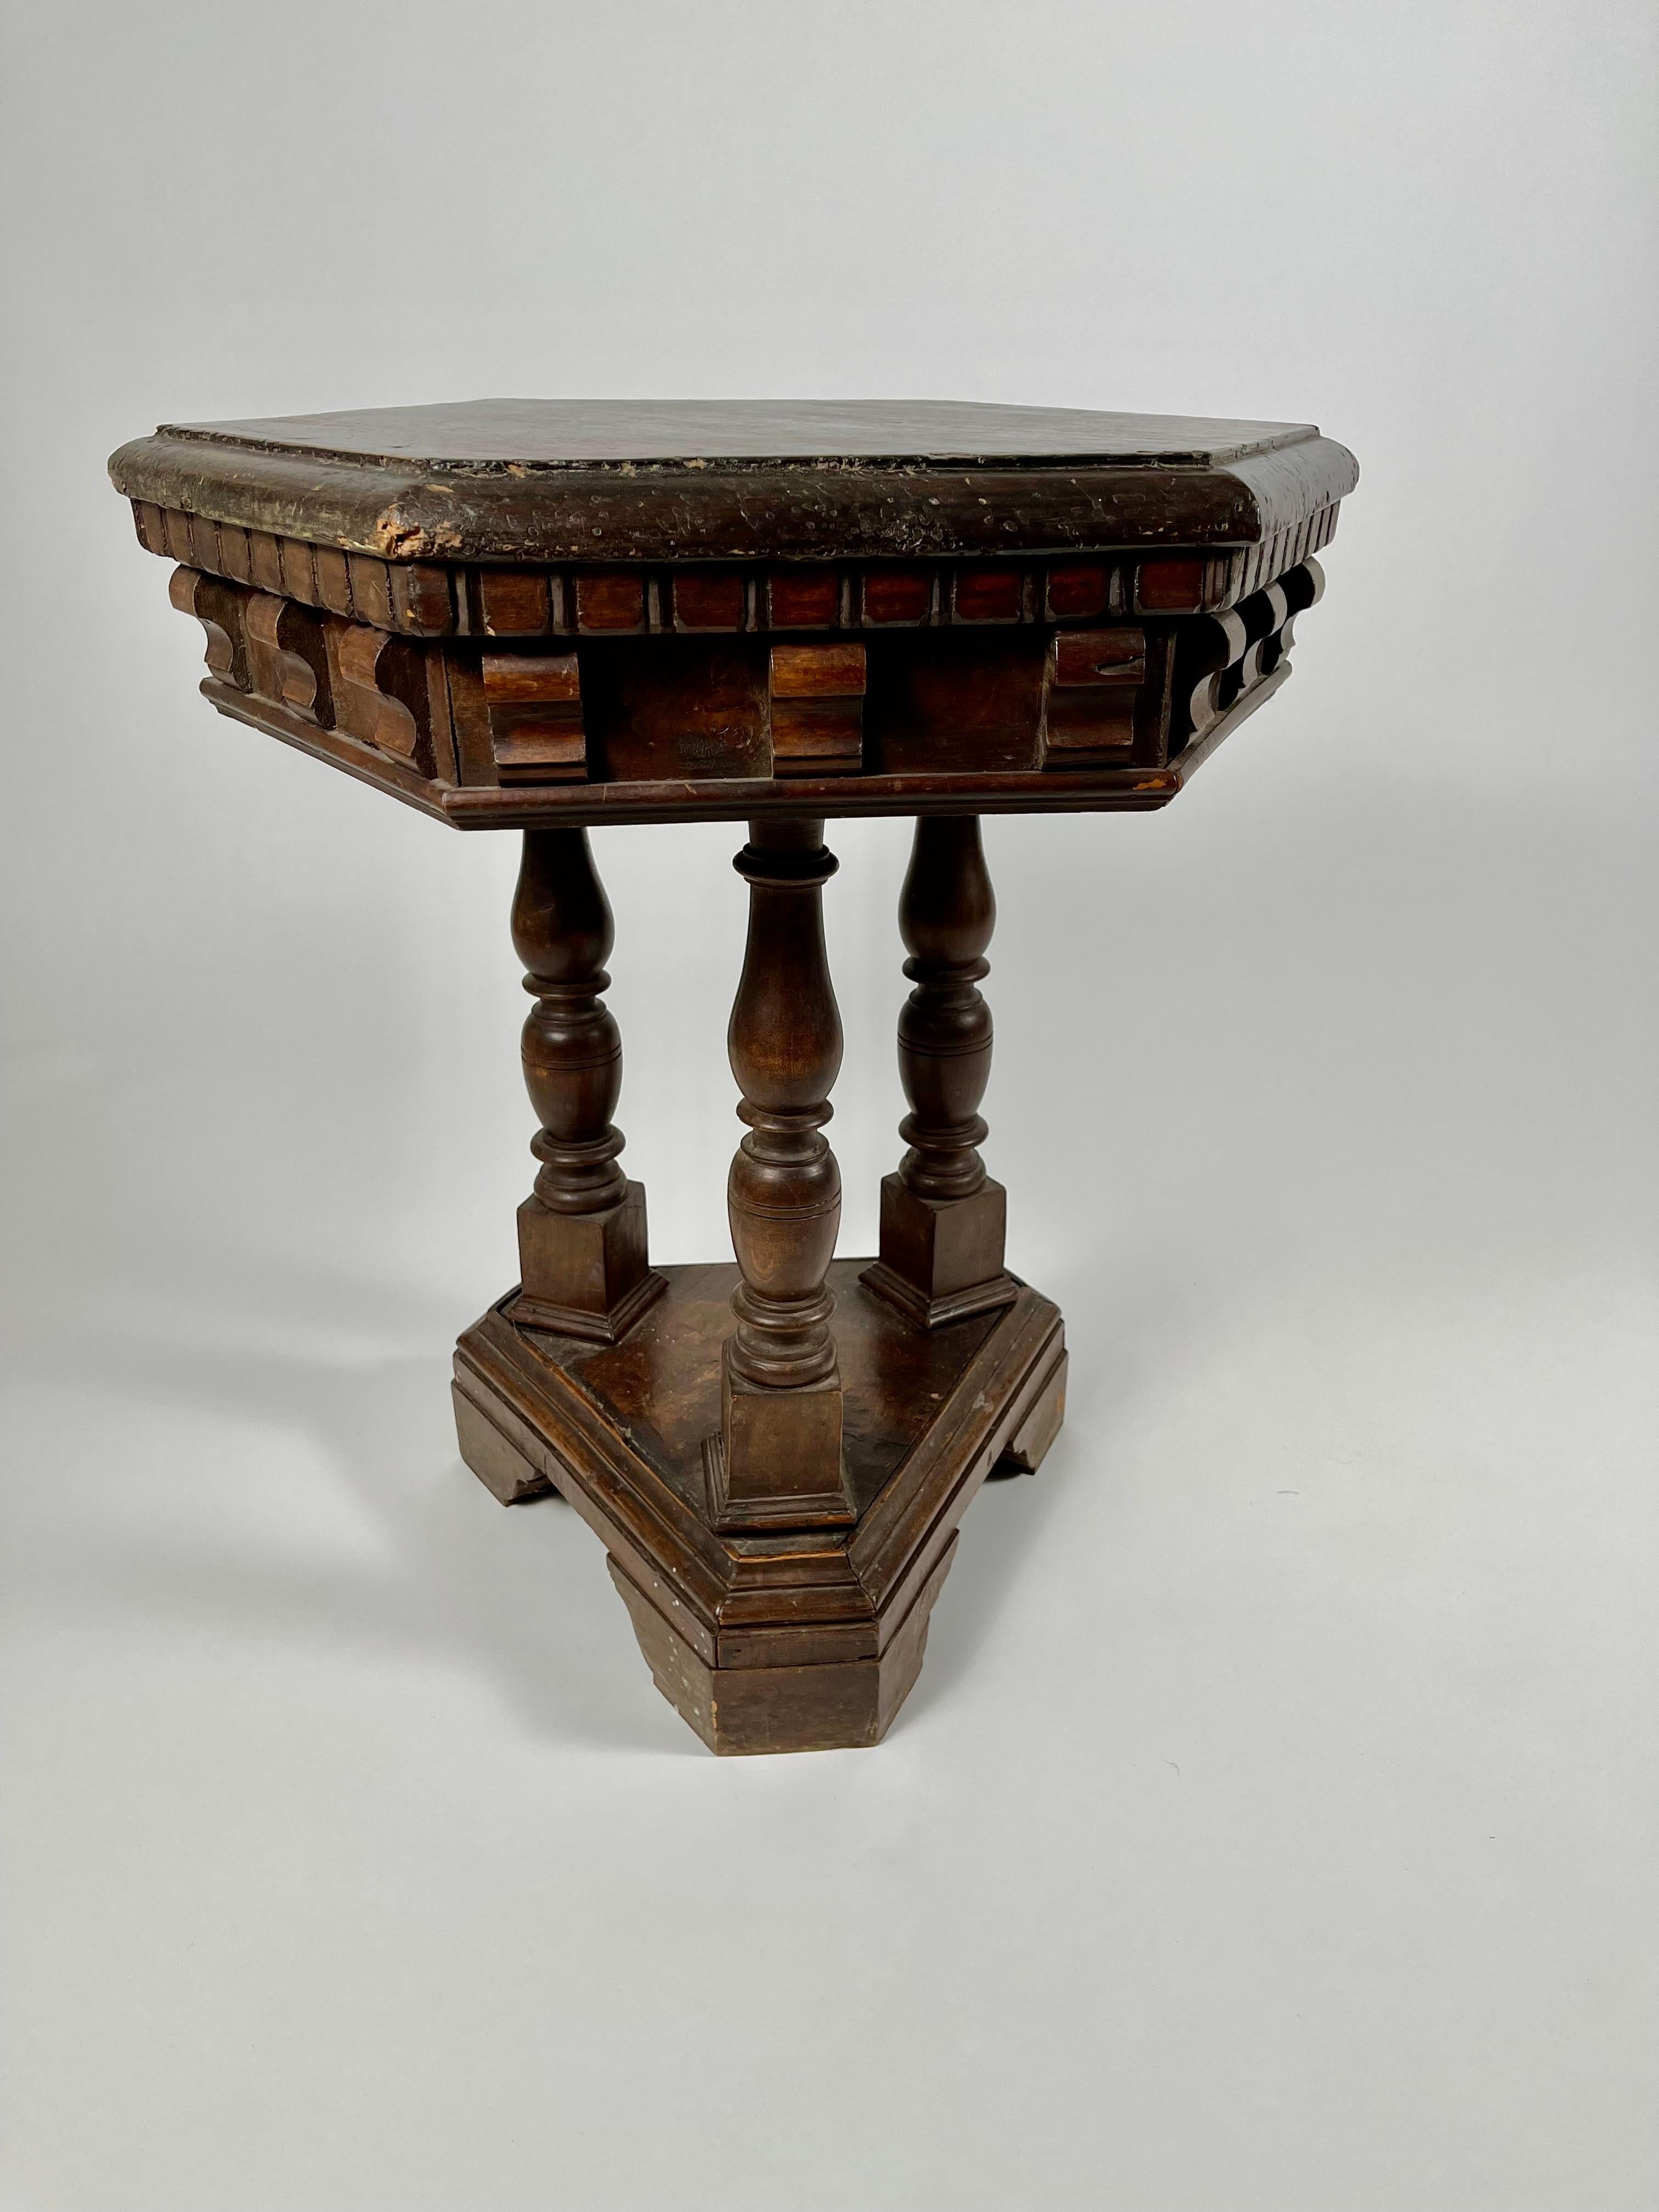 An Italian Renaissance Revival walnut side table with good patina and architectural form, the hexagonal top over a frieze with applied carved corbels, supported by three baluster turned legs raised on a triangular plinth base. Ideal for use as an